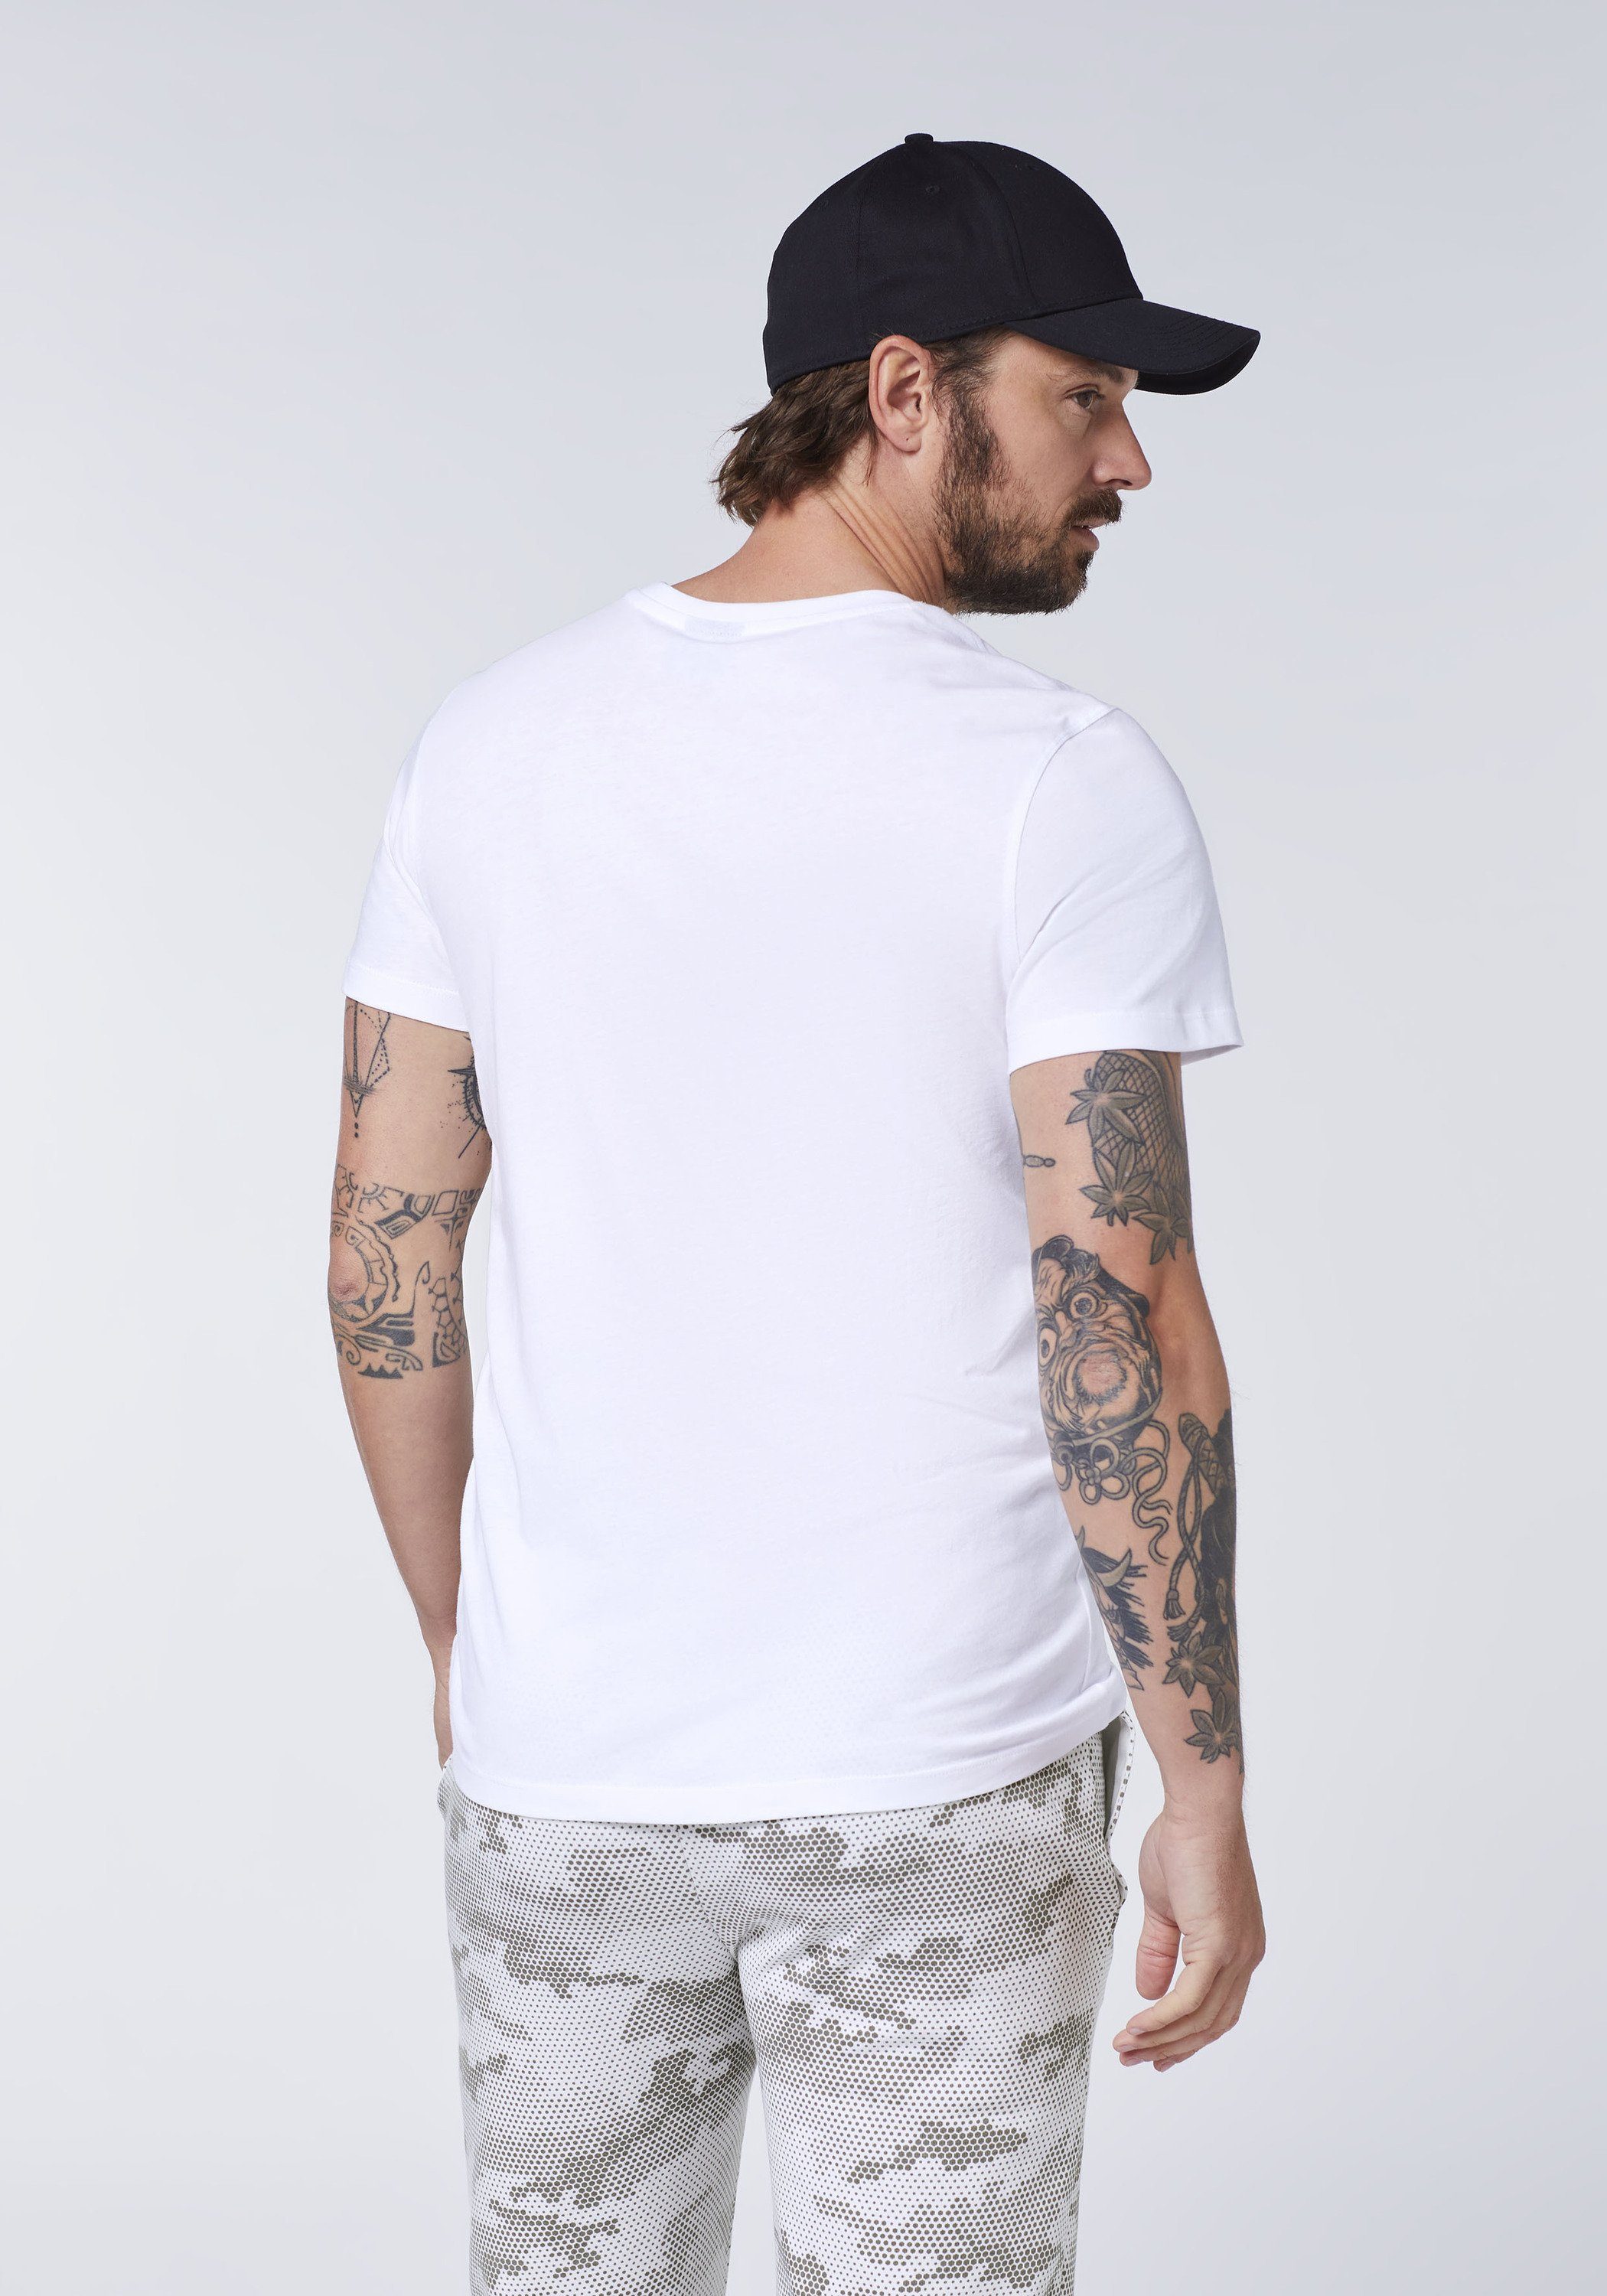 Sam Print-Shirt Passform in 11-0601 Uncle relaxter Bright White